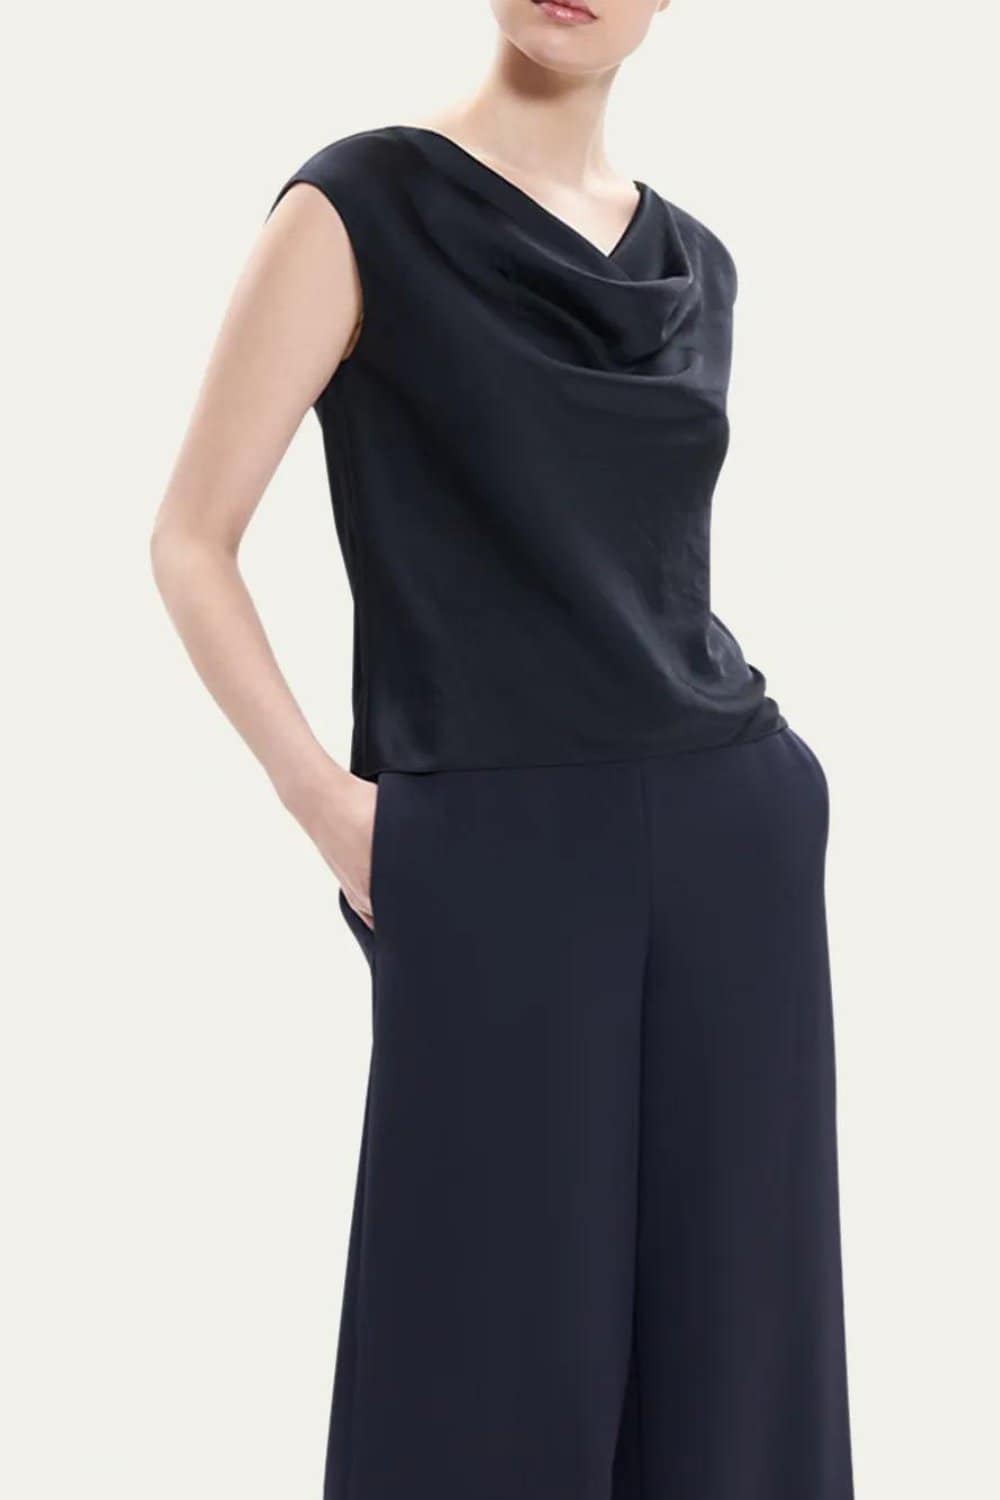 Theory Cap Sleeve Crushed Satin Cowl Neck Top